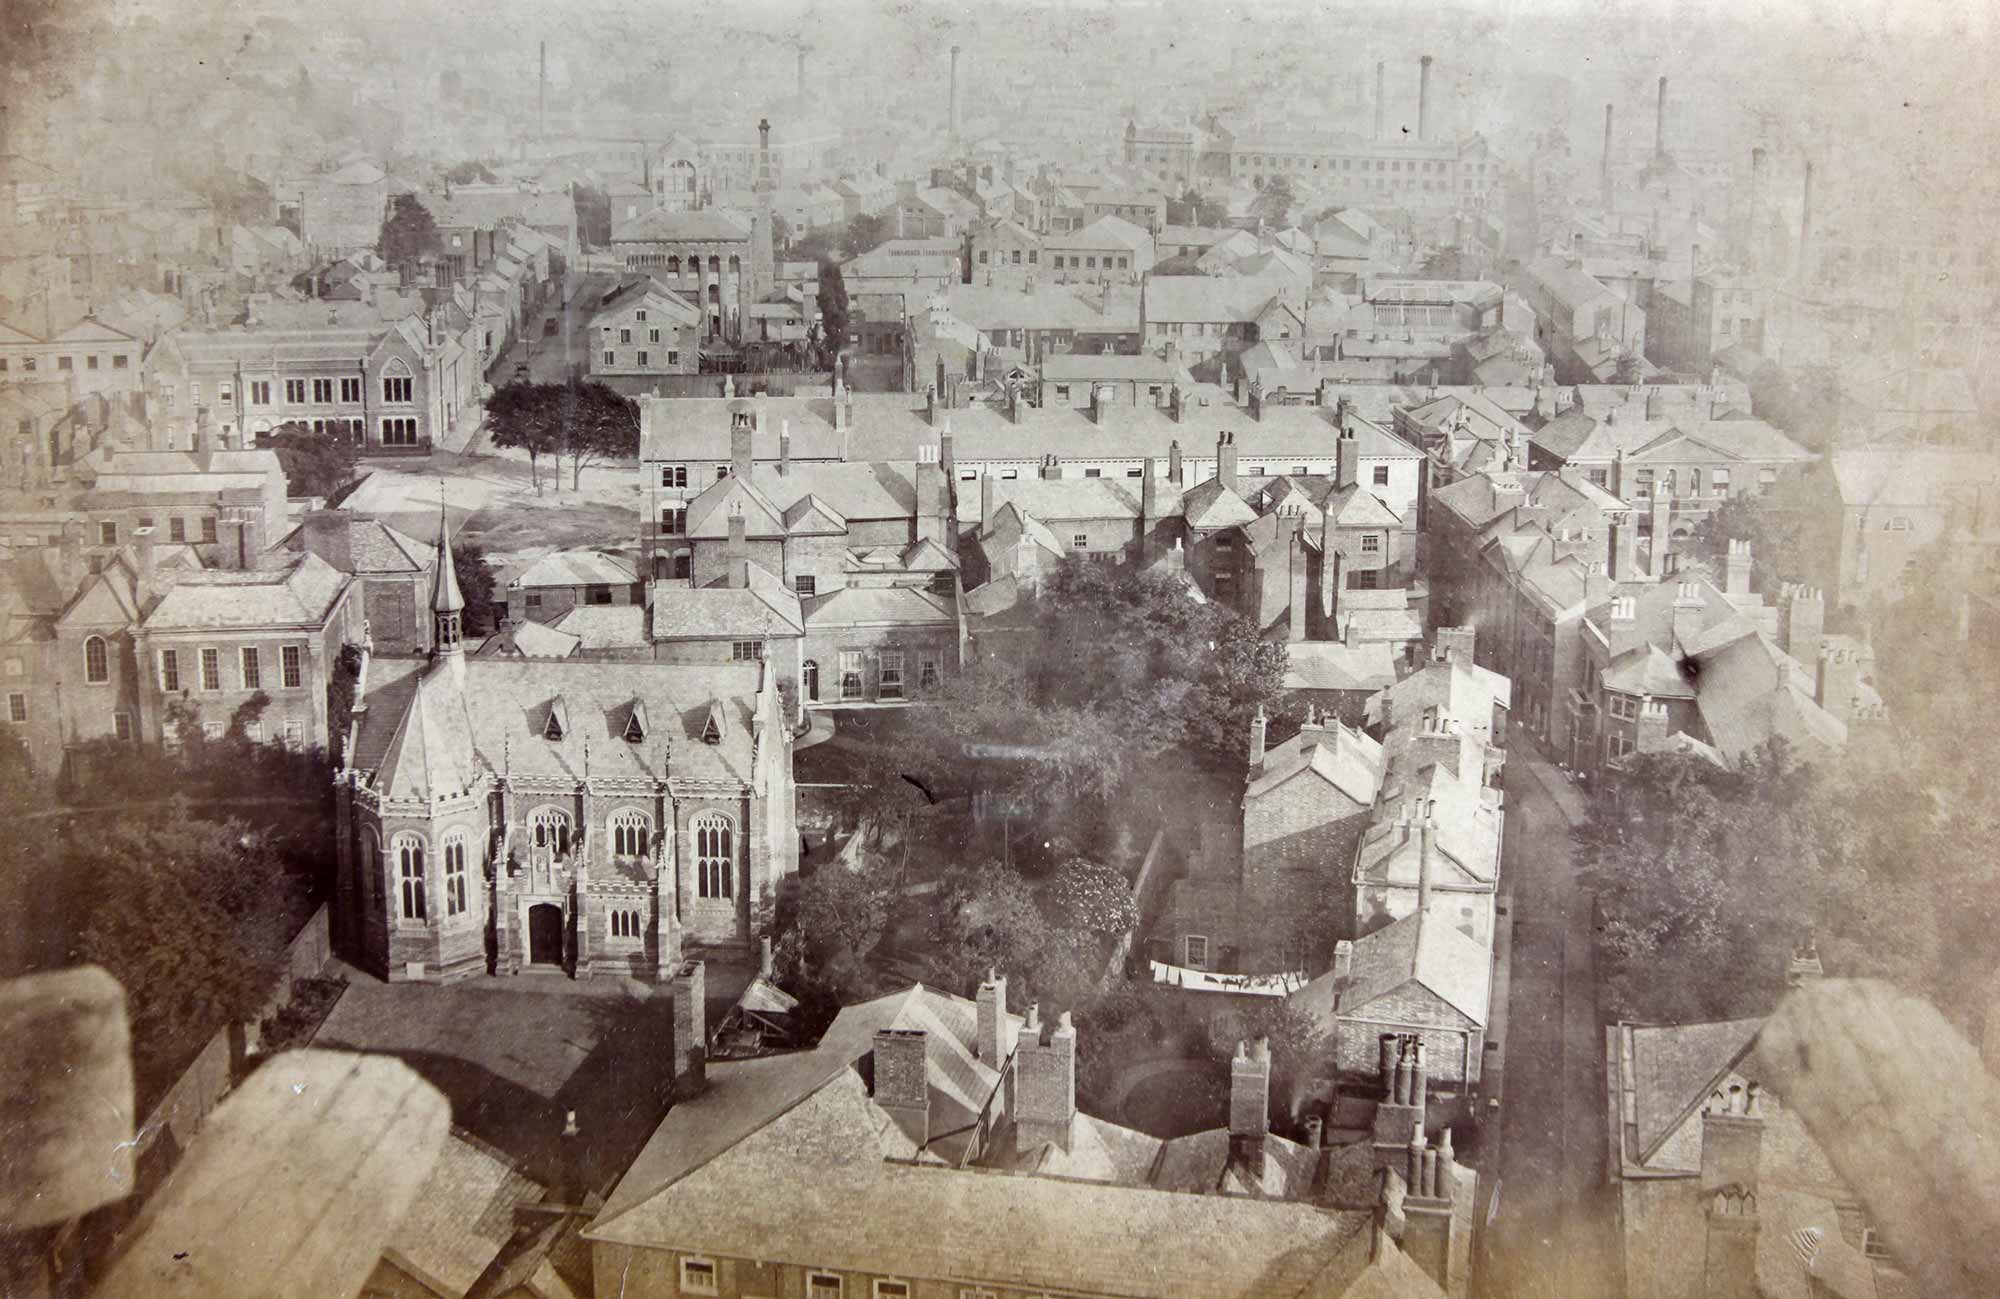 A view across the rear of Friar Lane, taken from the top of the Cathedral spire c.1867 17 Friar Lane is to the middle left with 4 long windows at the back -